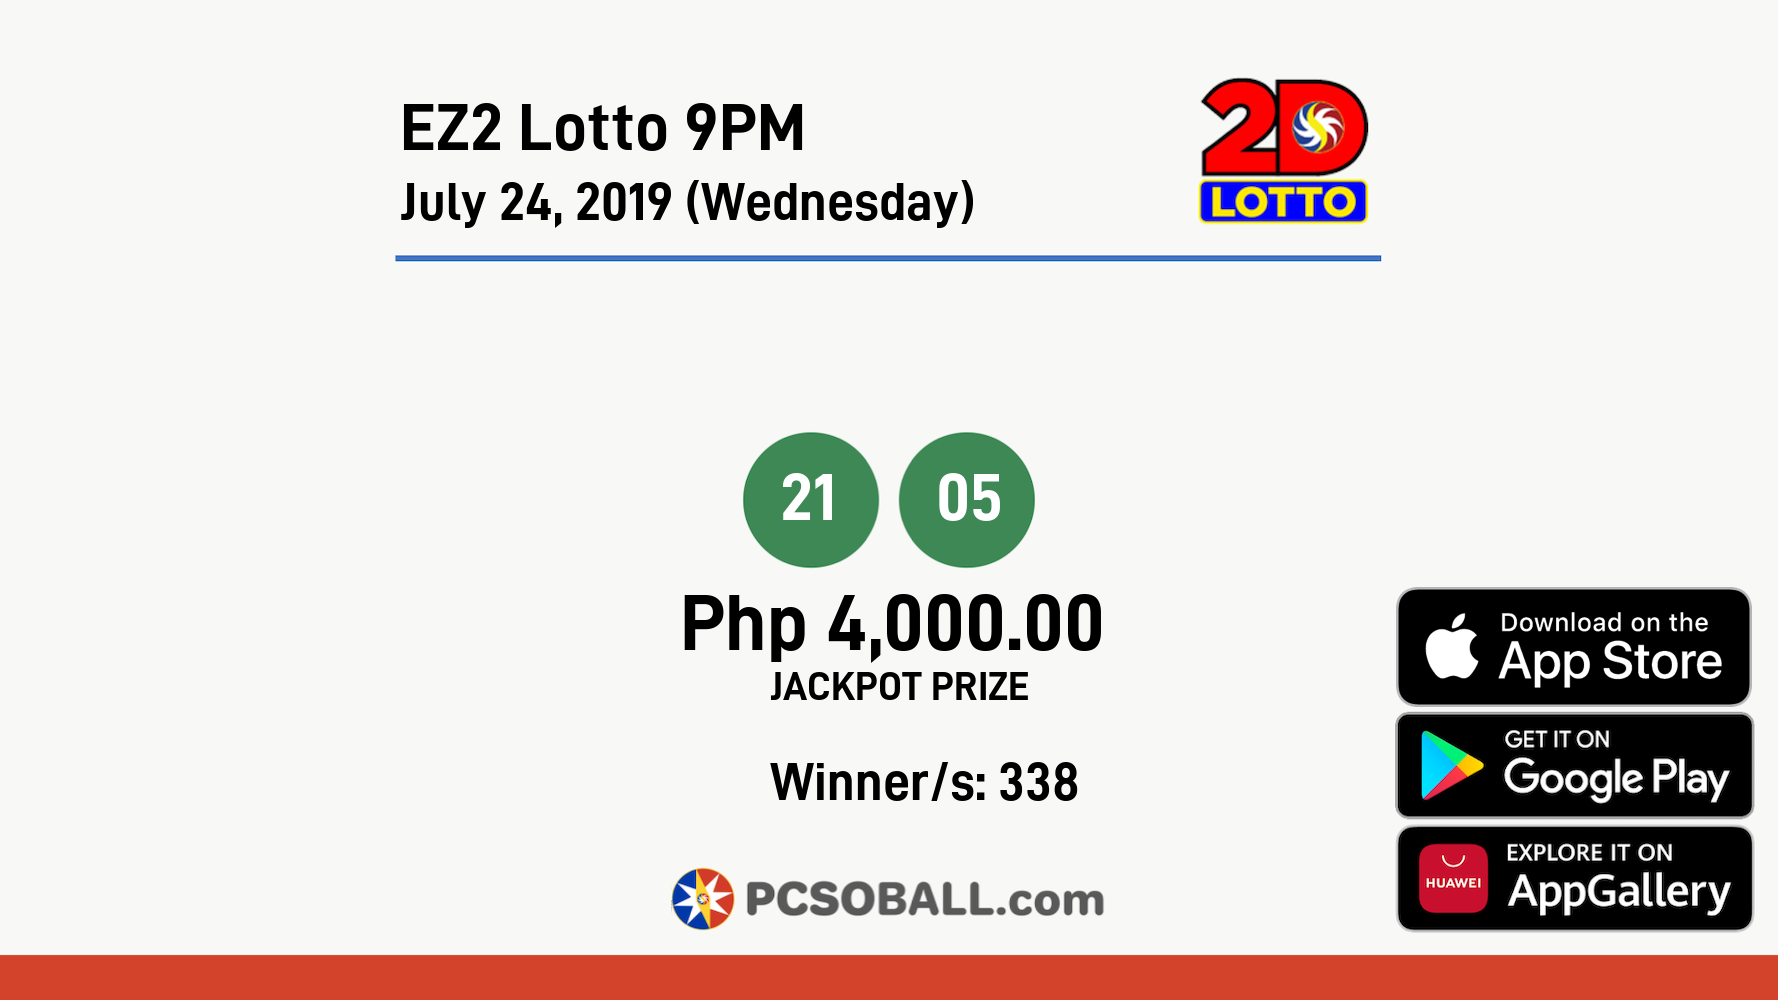 EZ2 Lotto 9PM July 24, 2019 (Wednesday) Result